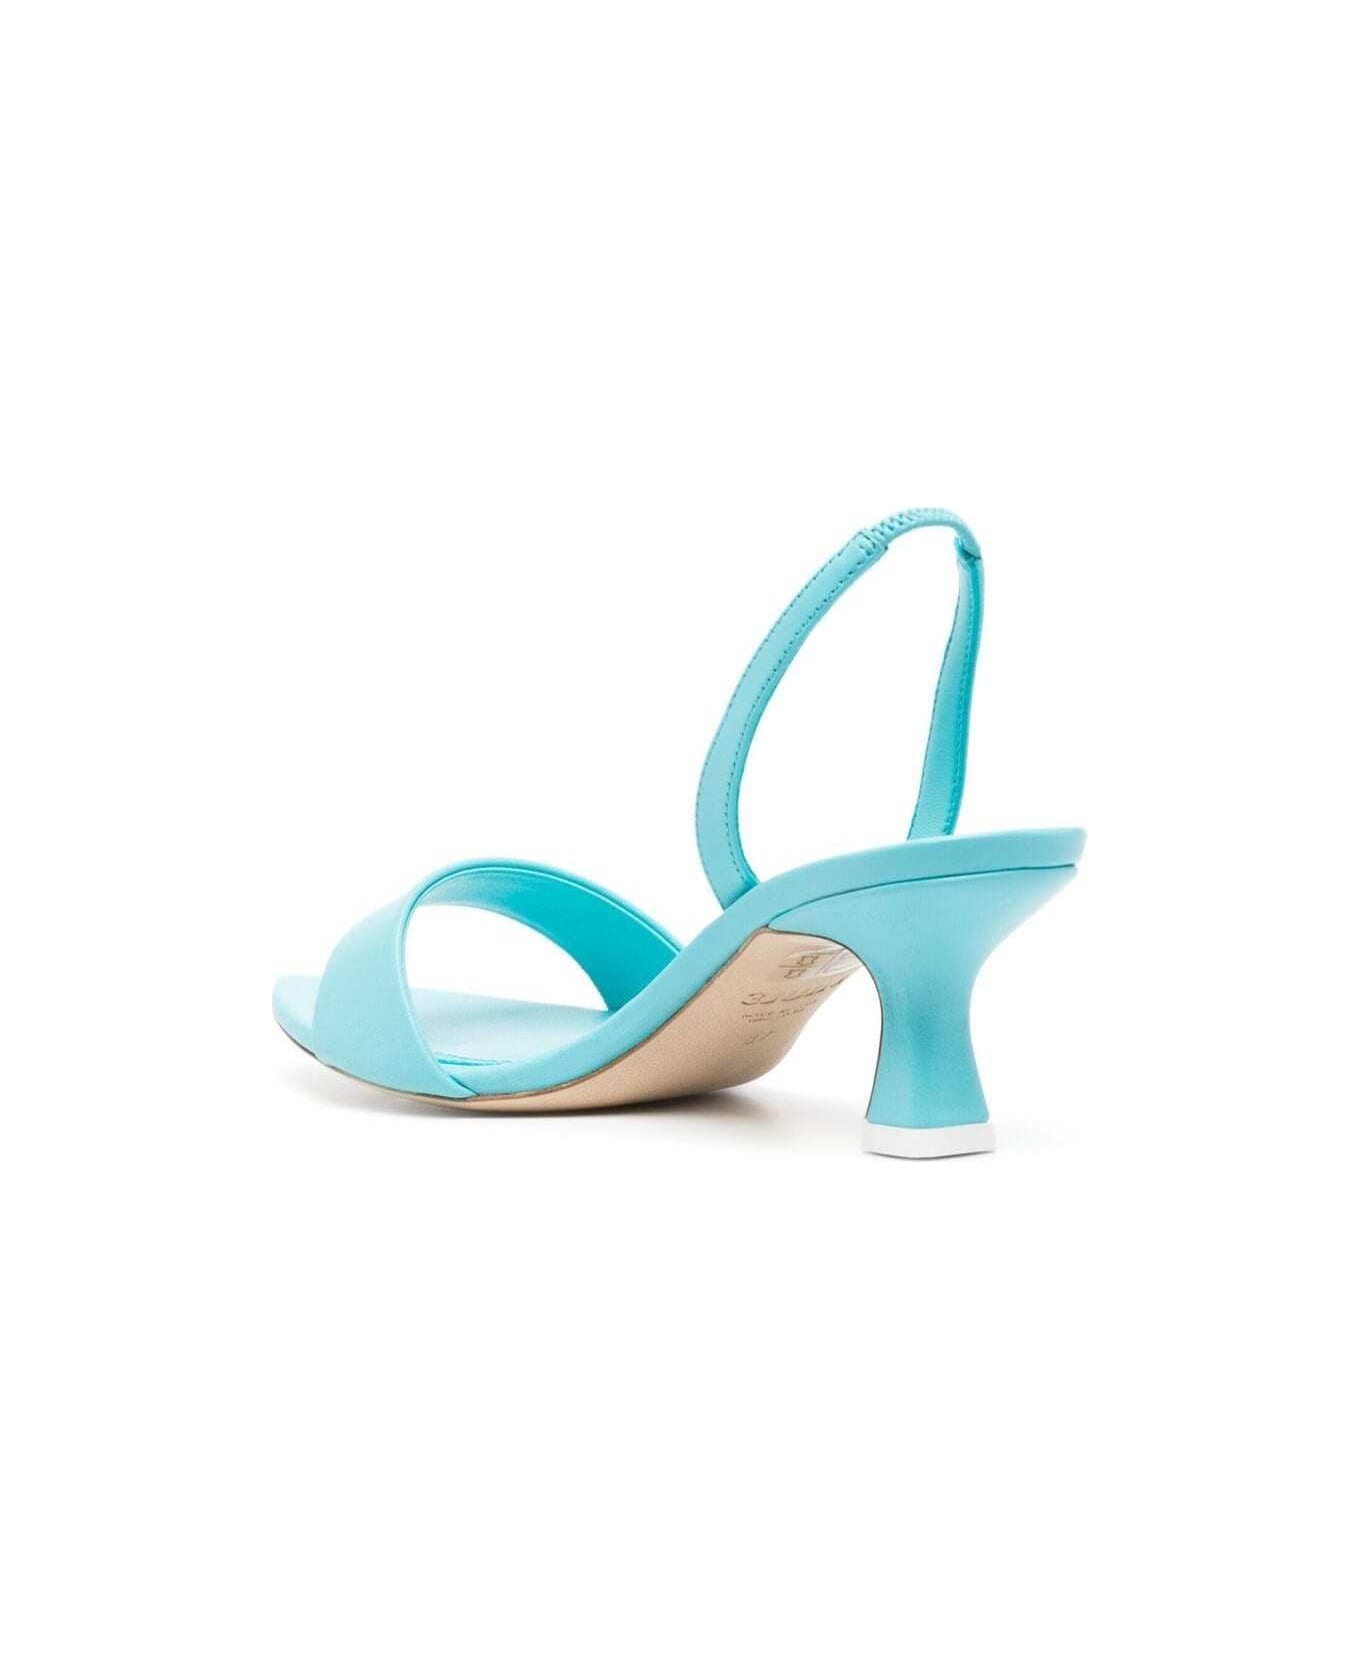 3JUIN 'orchid' Light Blue Pointed Sandals In Leather Woman - Light blue